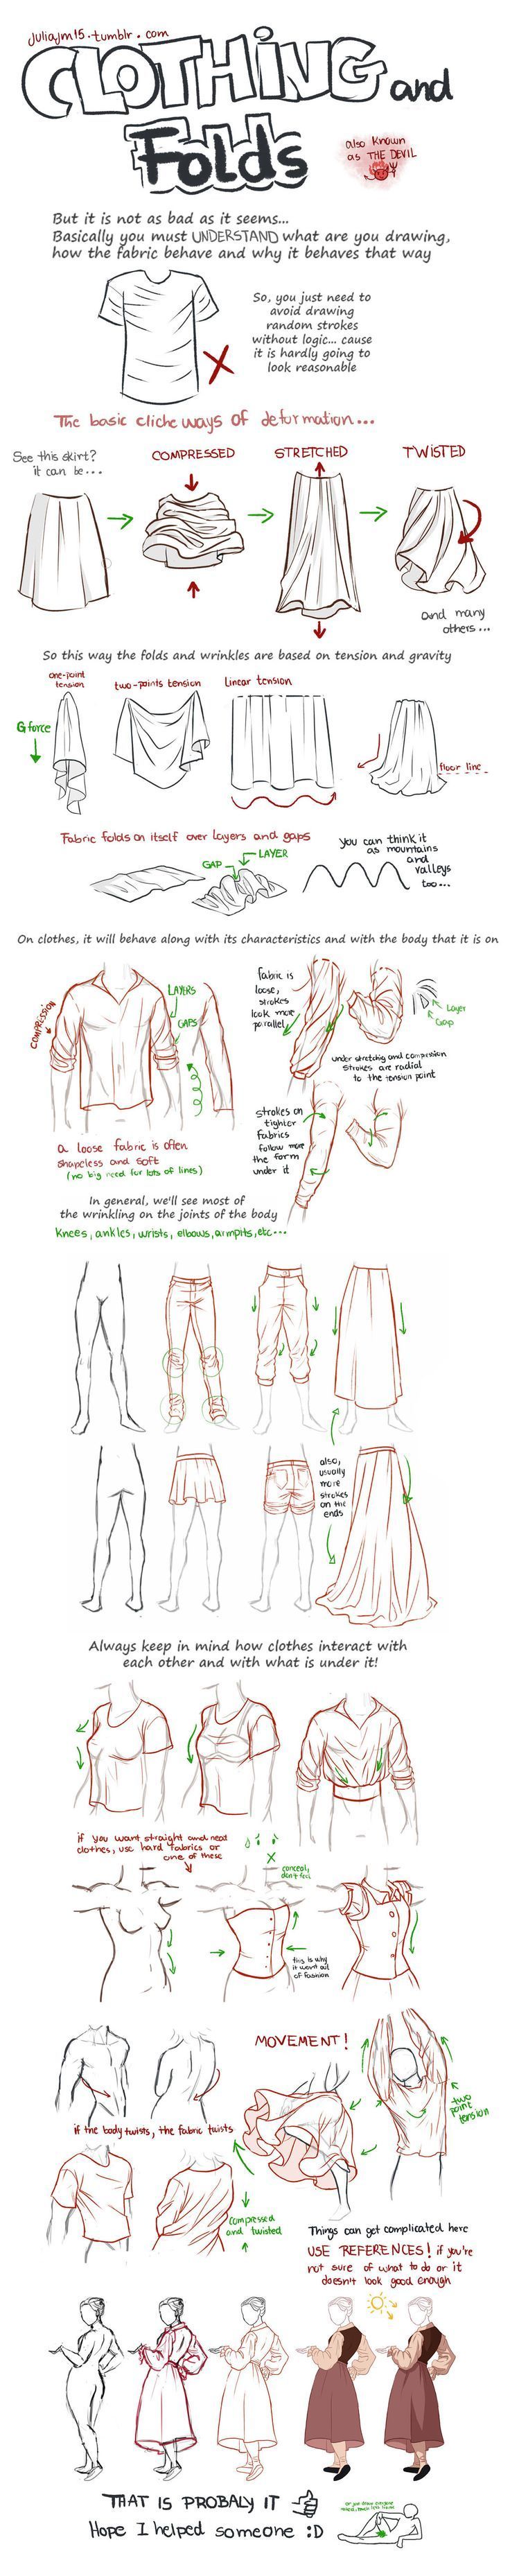 Illustration showing how to draw fabric folds and drape.  Drawing folds and wrinkl